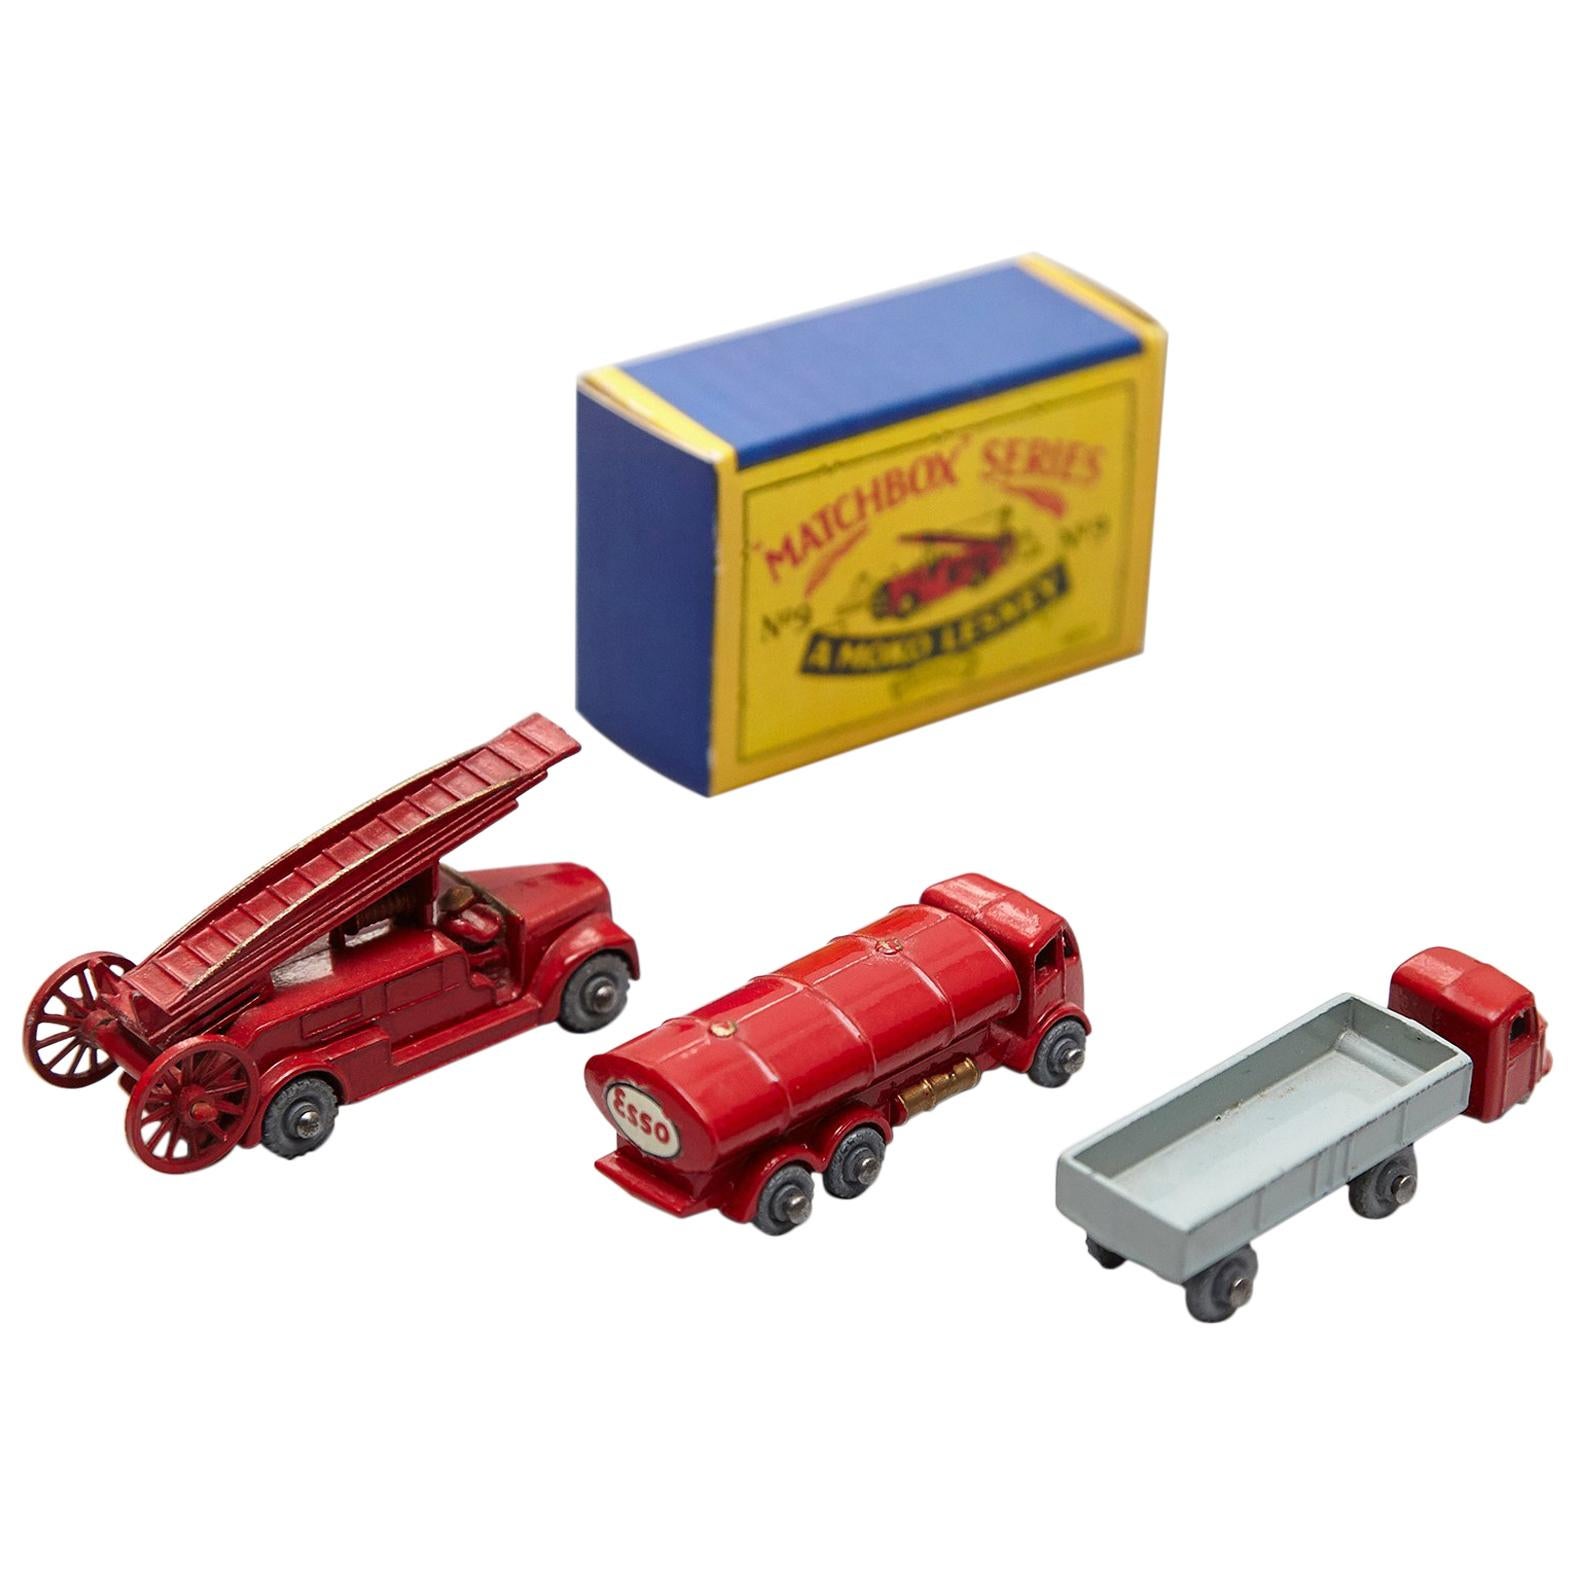 Lesney Matchboxes Series Antique Metal Toy, Three Red Fire Trucks, circa 1950